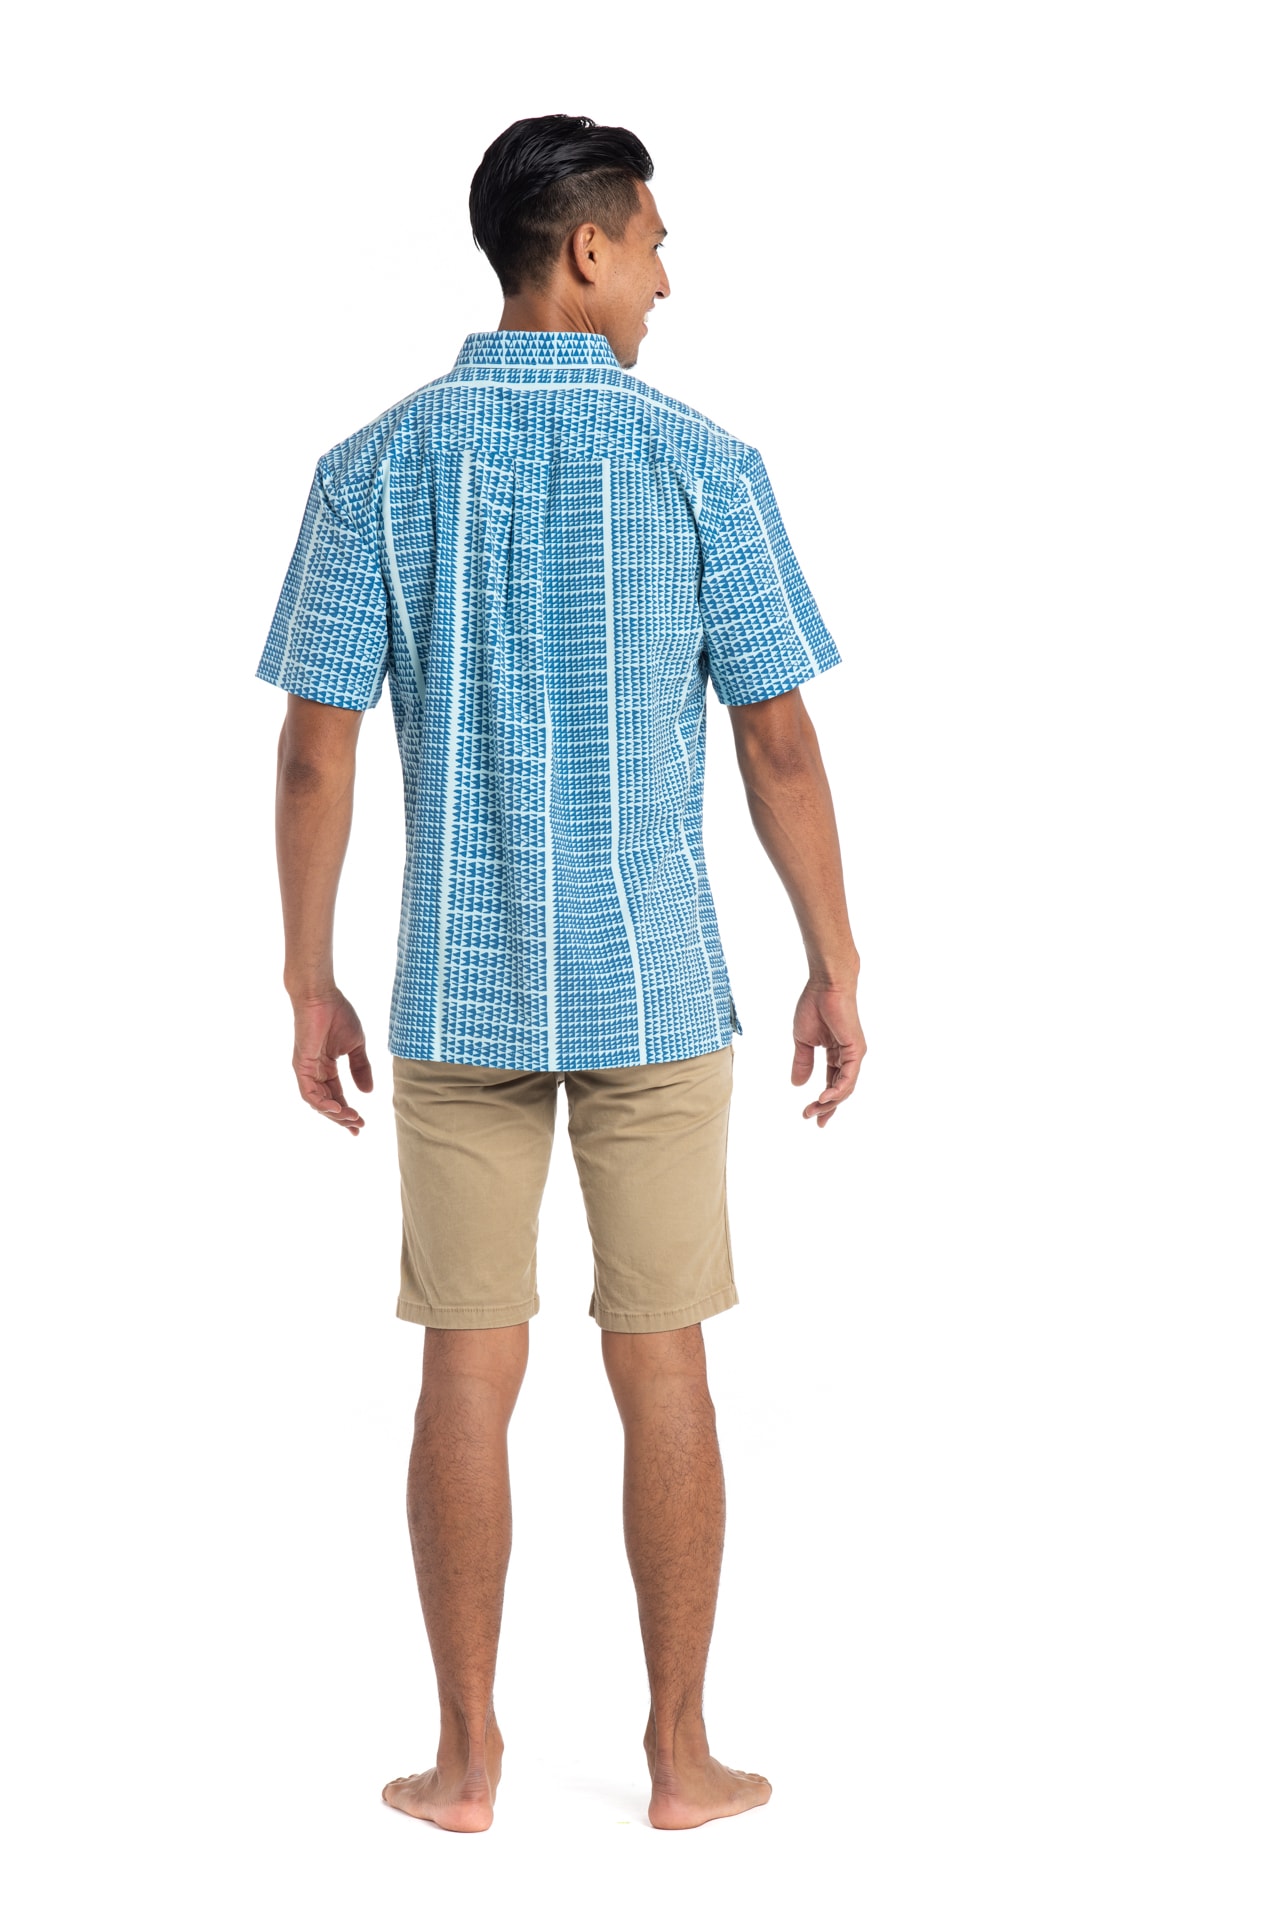 Male model wearing Mahalo Nui Shirt in Light Blue - Back View